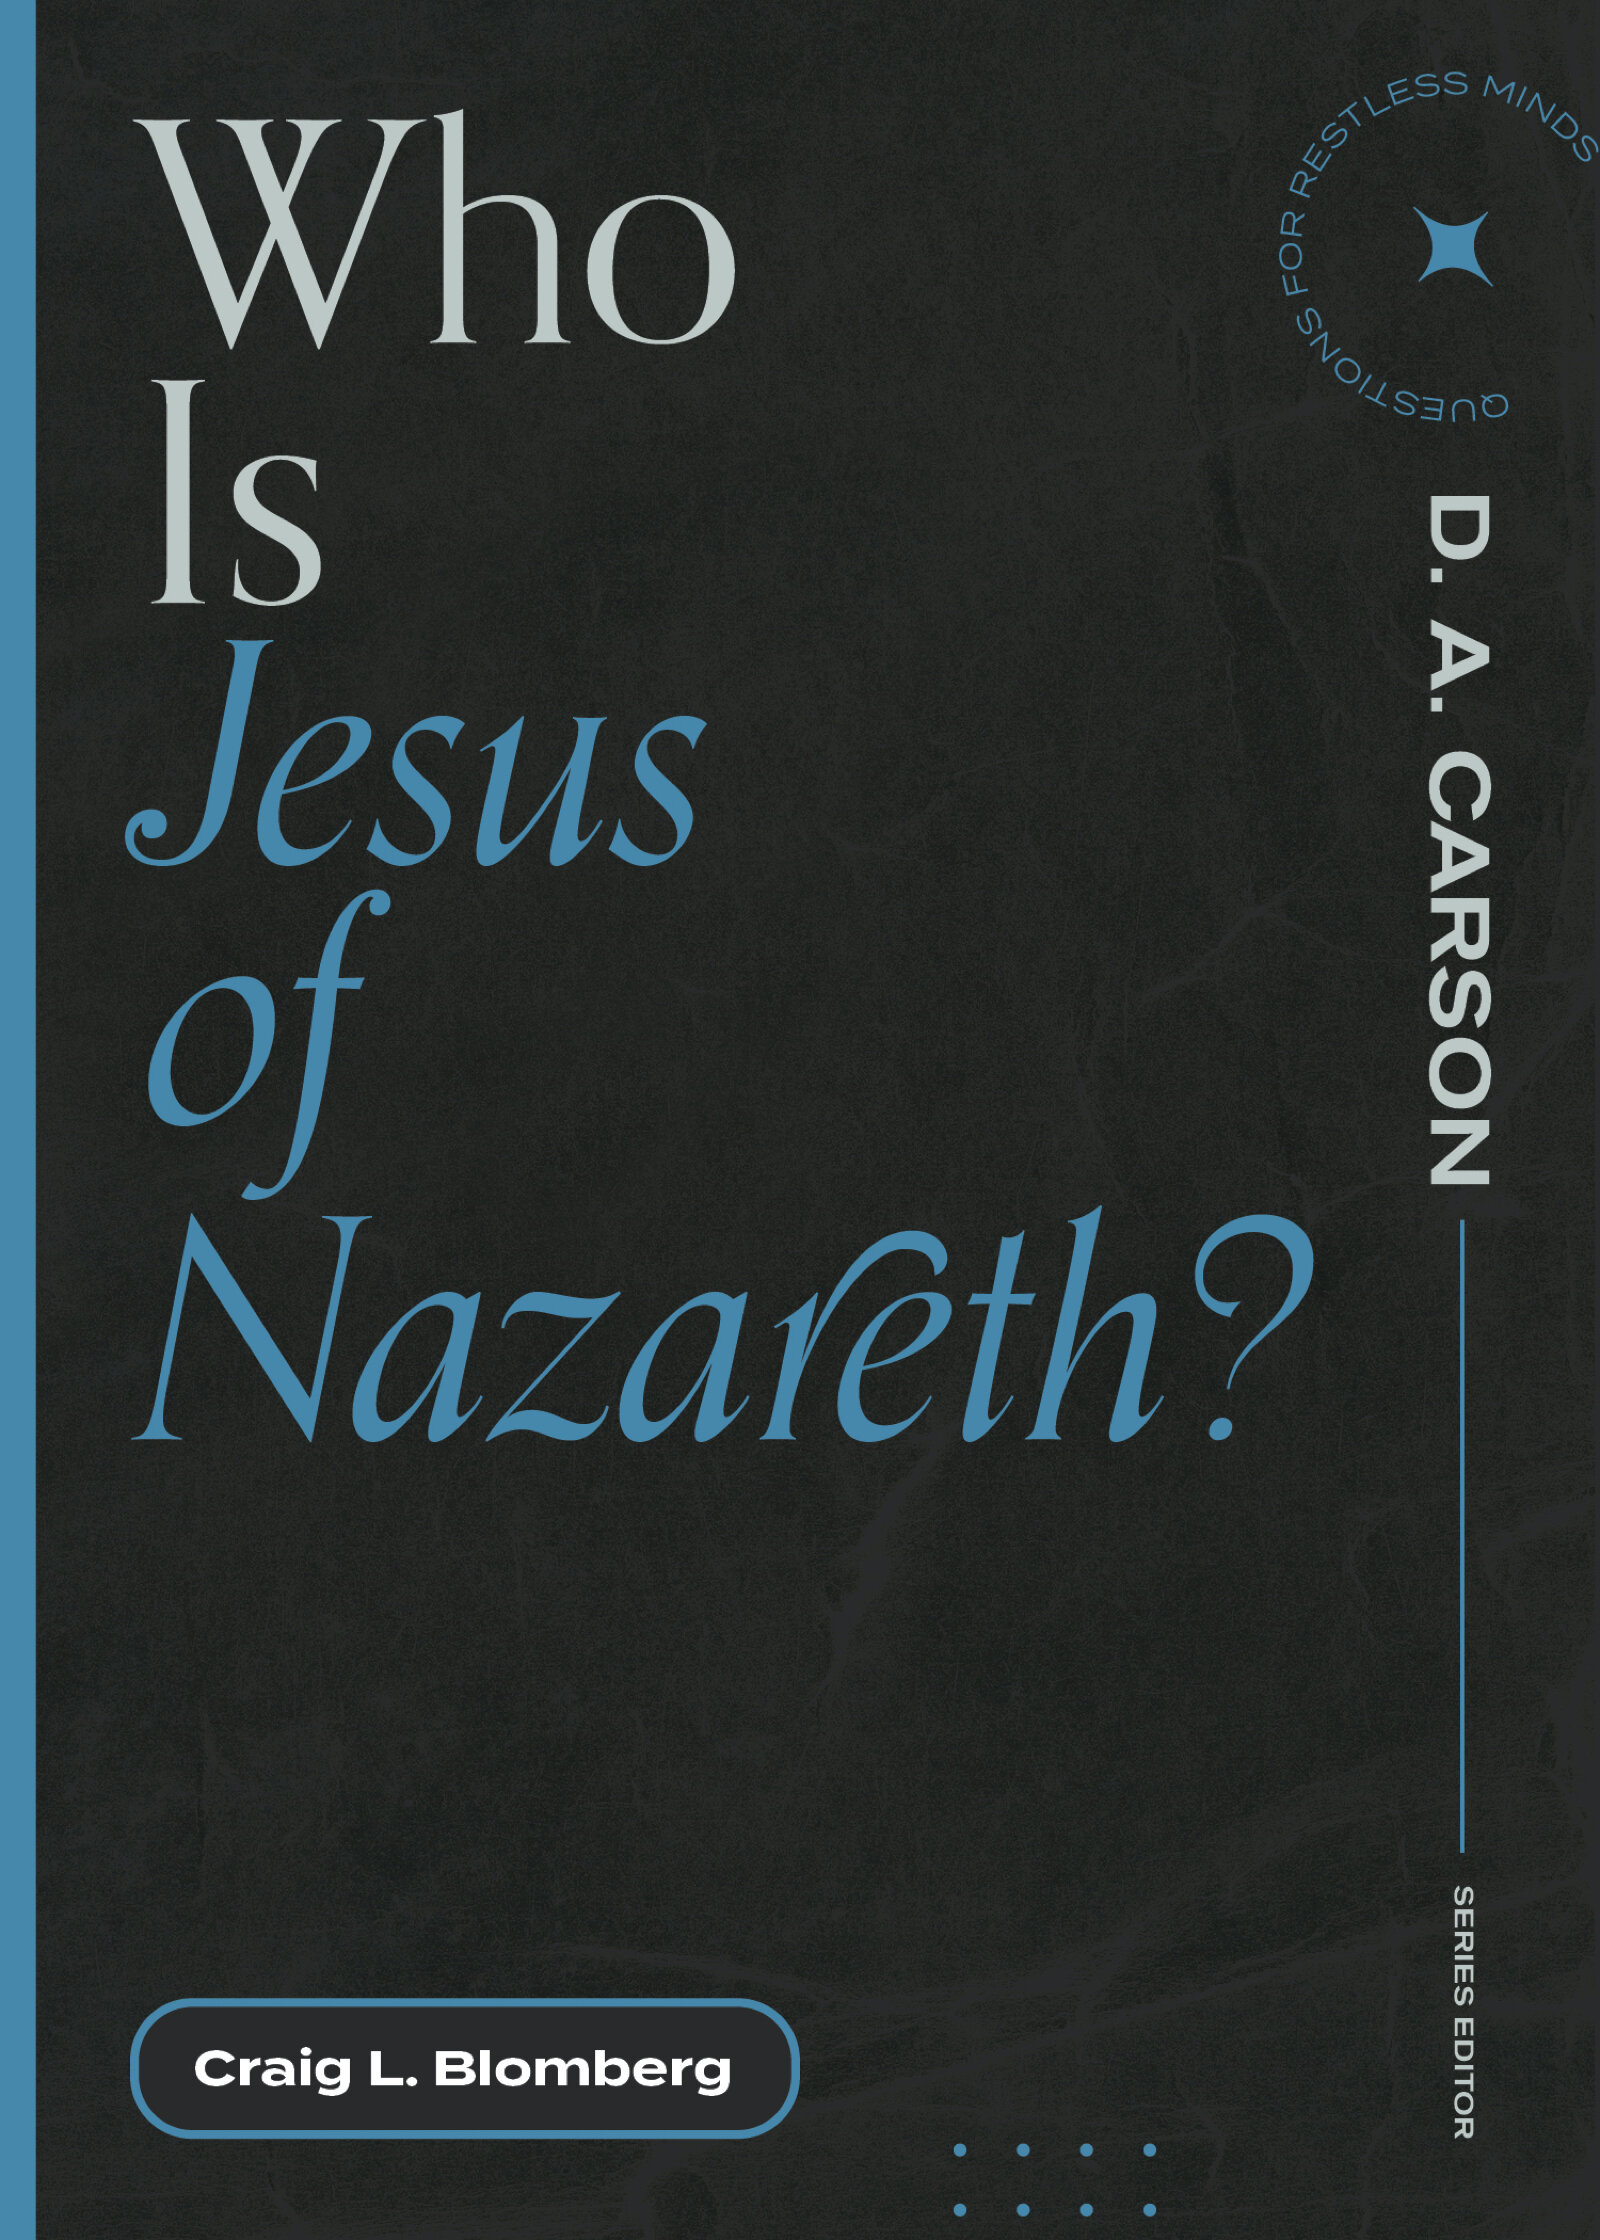 Who Is Jesus of Nazareth? (Questions for Restless Minds)